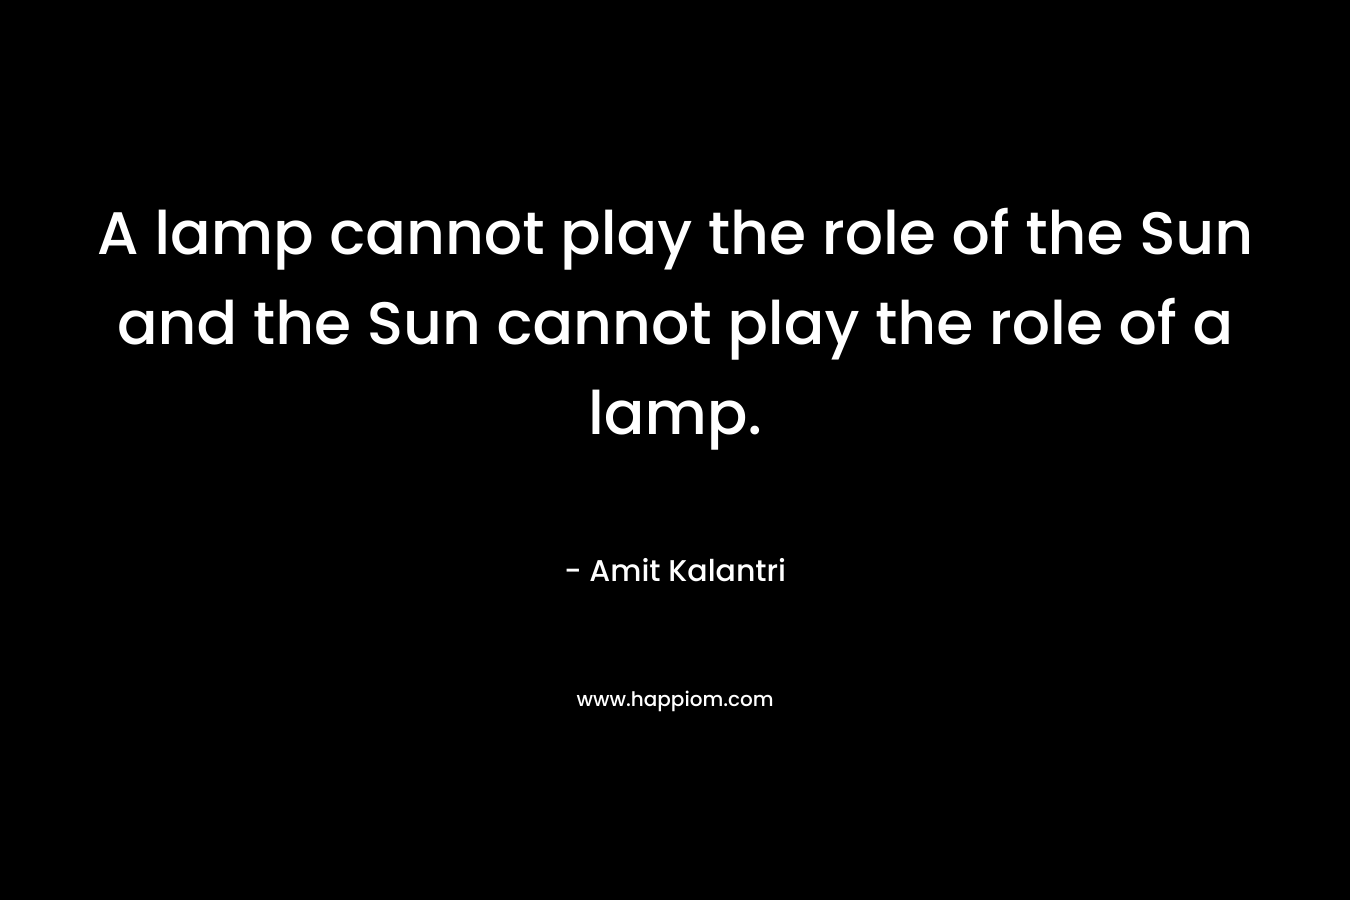 A lamp cannot play the role of the Sun and the Sun cannot play the role of a lamp.